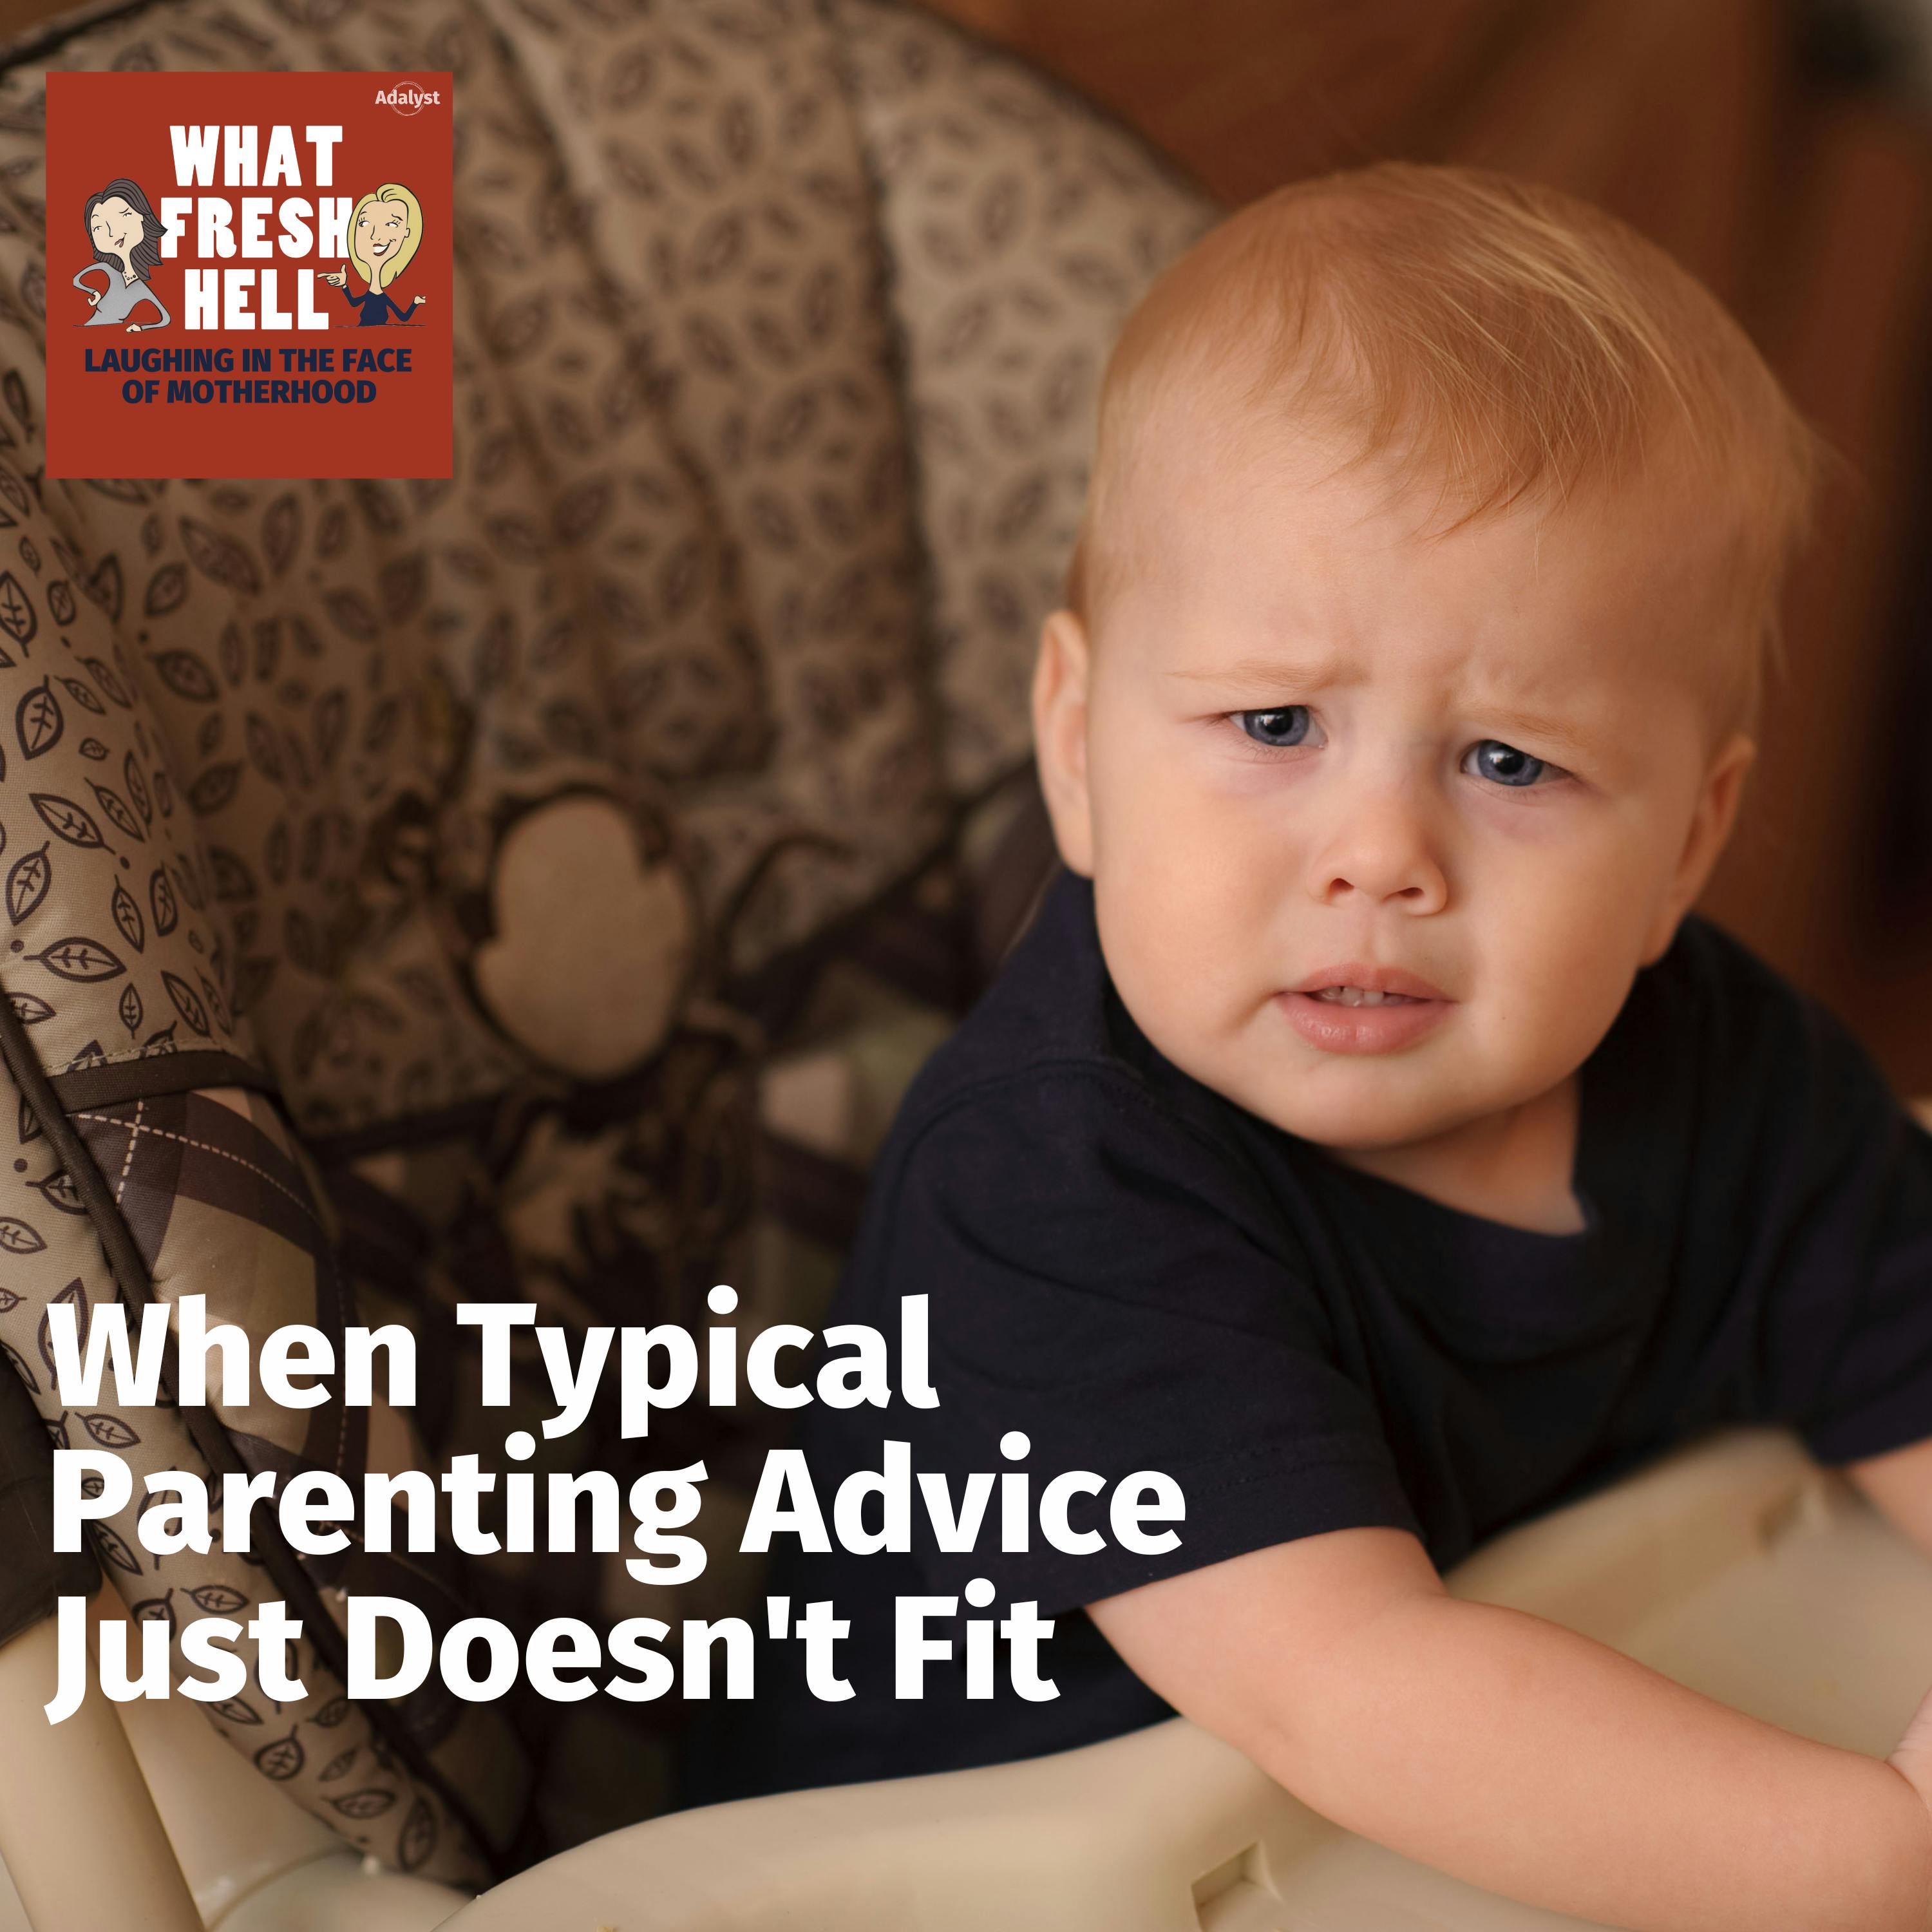 When Typical Parenting Advice Just Doesn't Fit